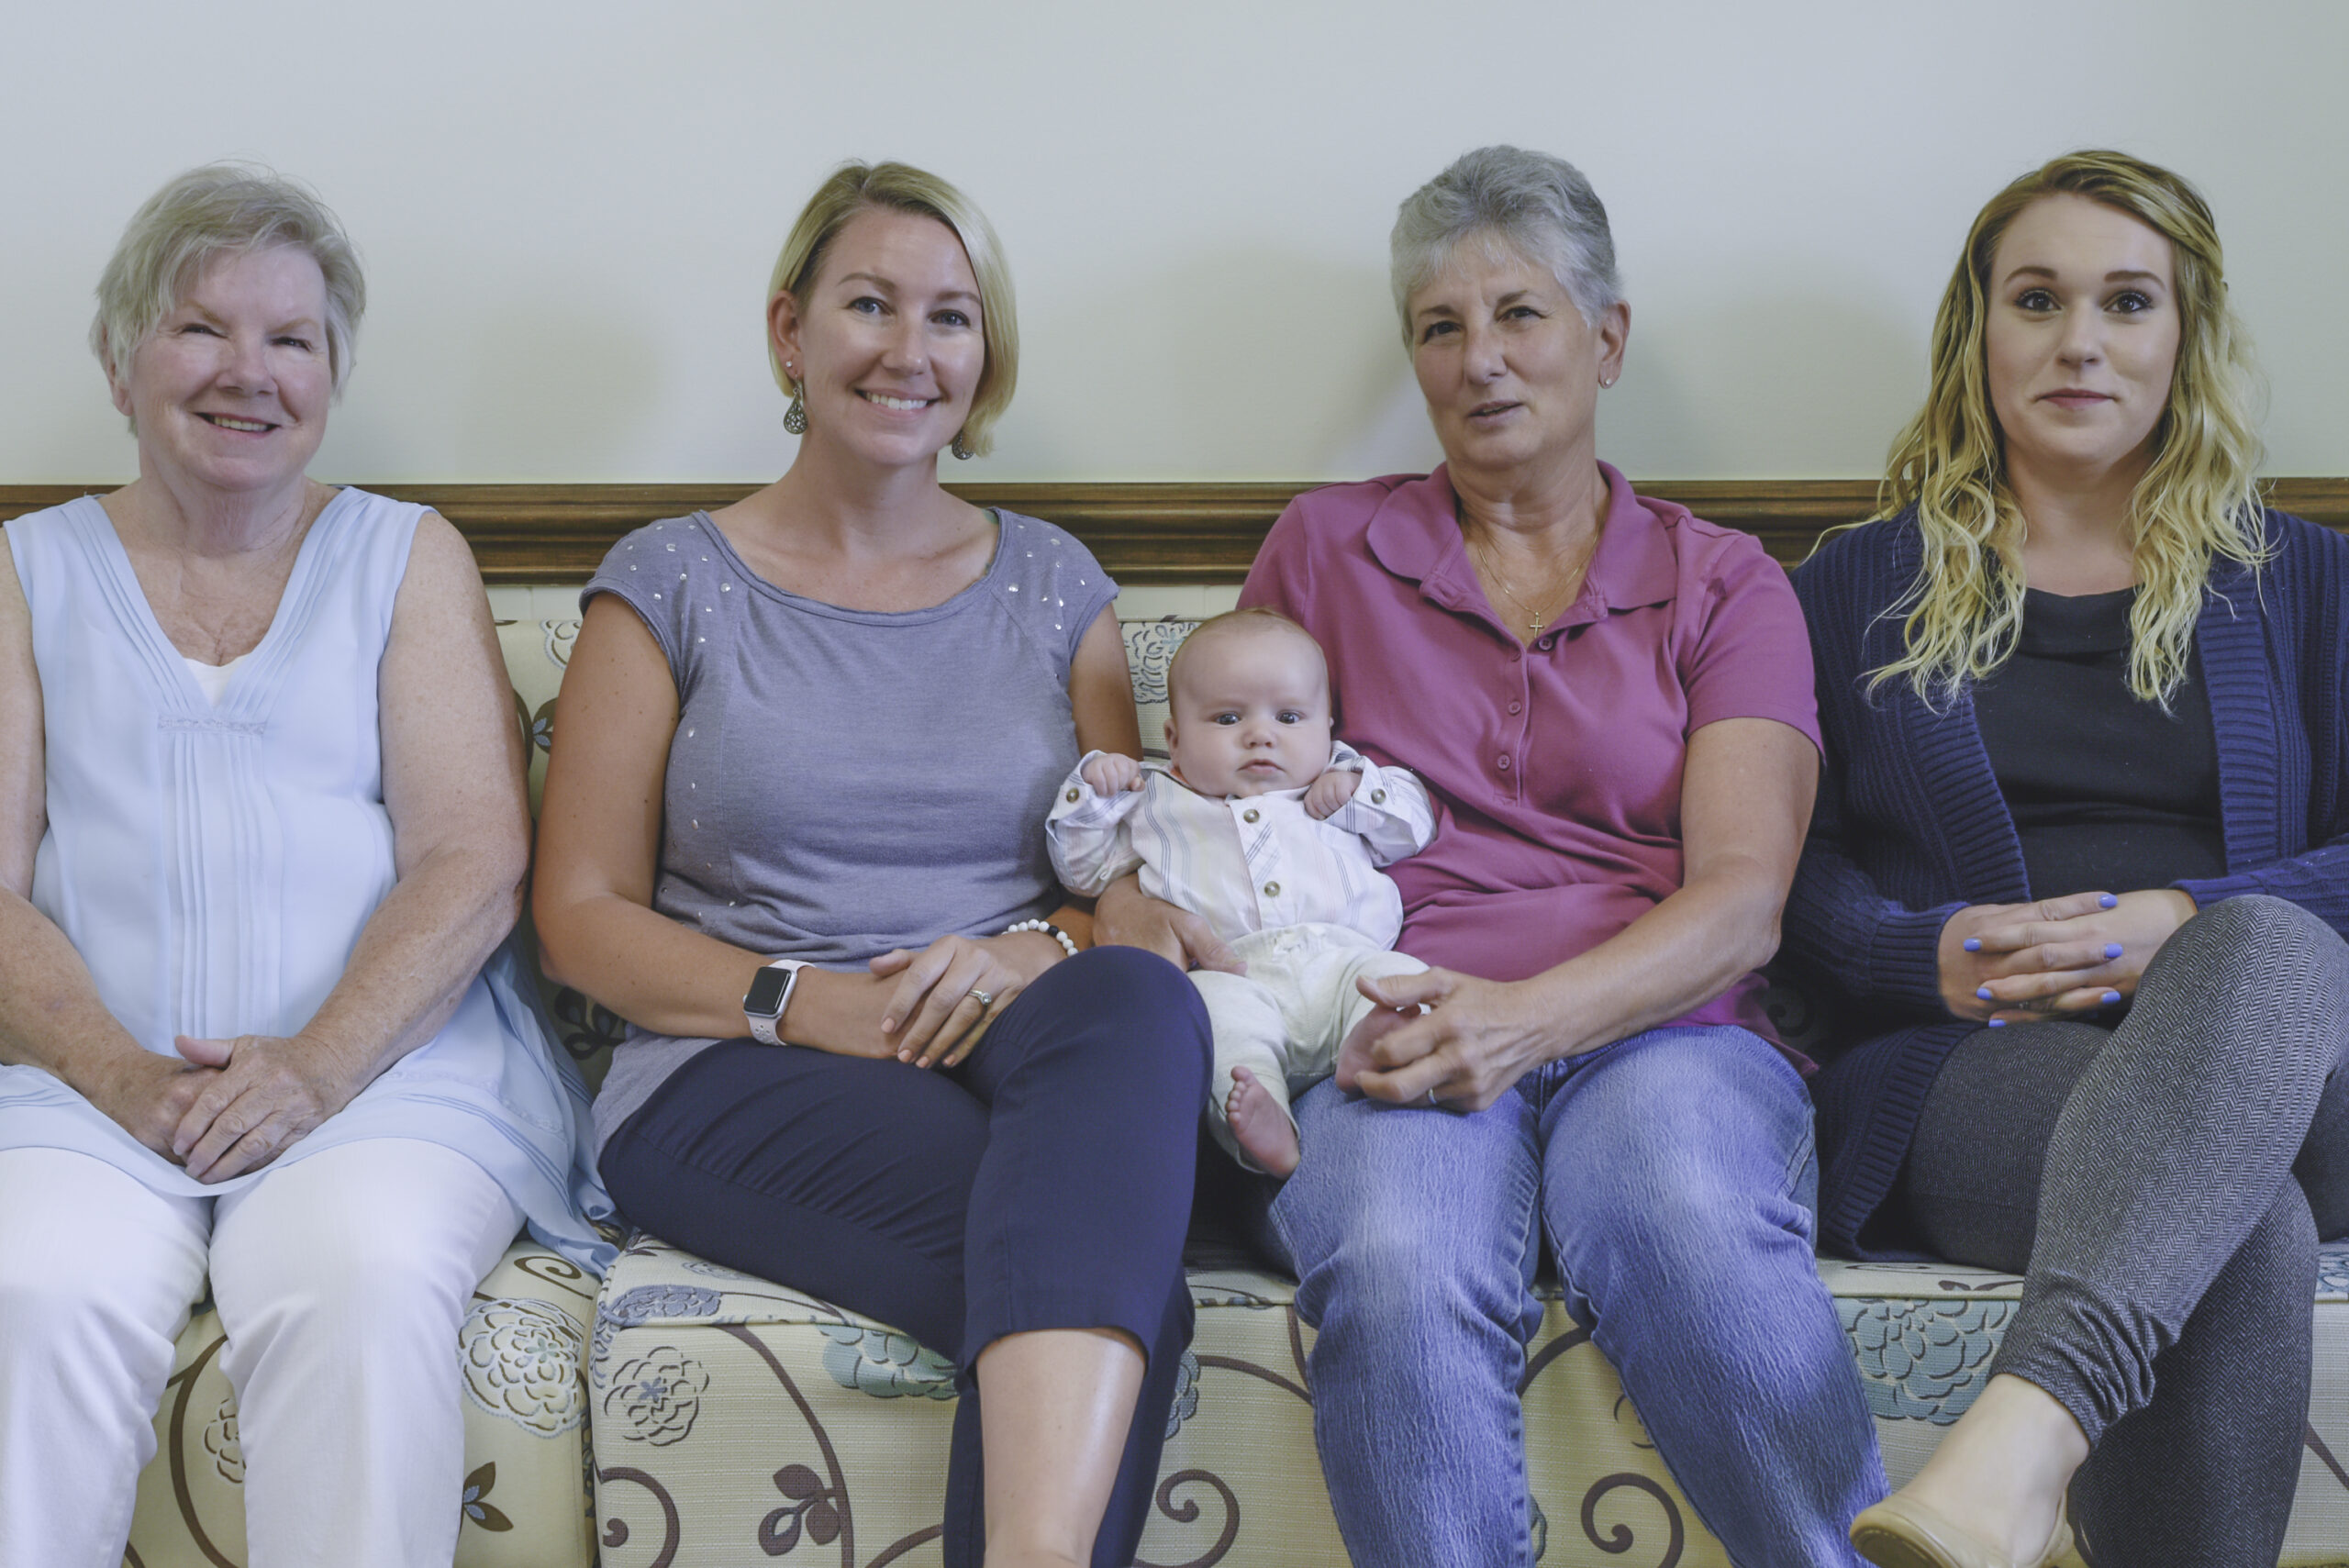 The Pro Tax & Accounting Team sitting on the couch with a baby including Andrea MacDonald, CPA, Sharon Ference, Whitney Schubert and Carma Boswell on the About us page.